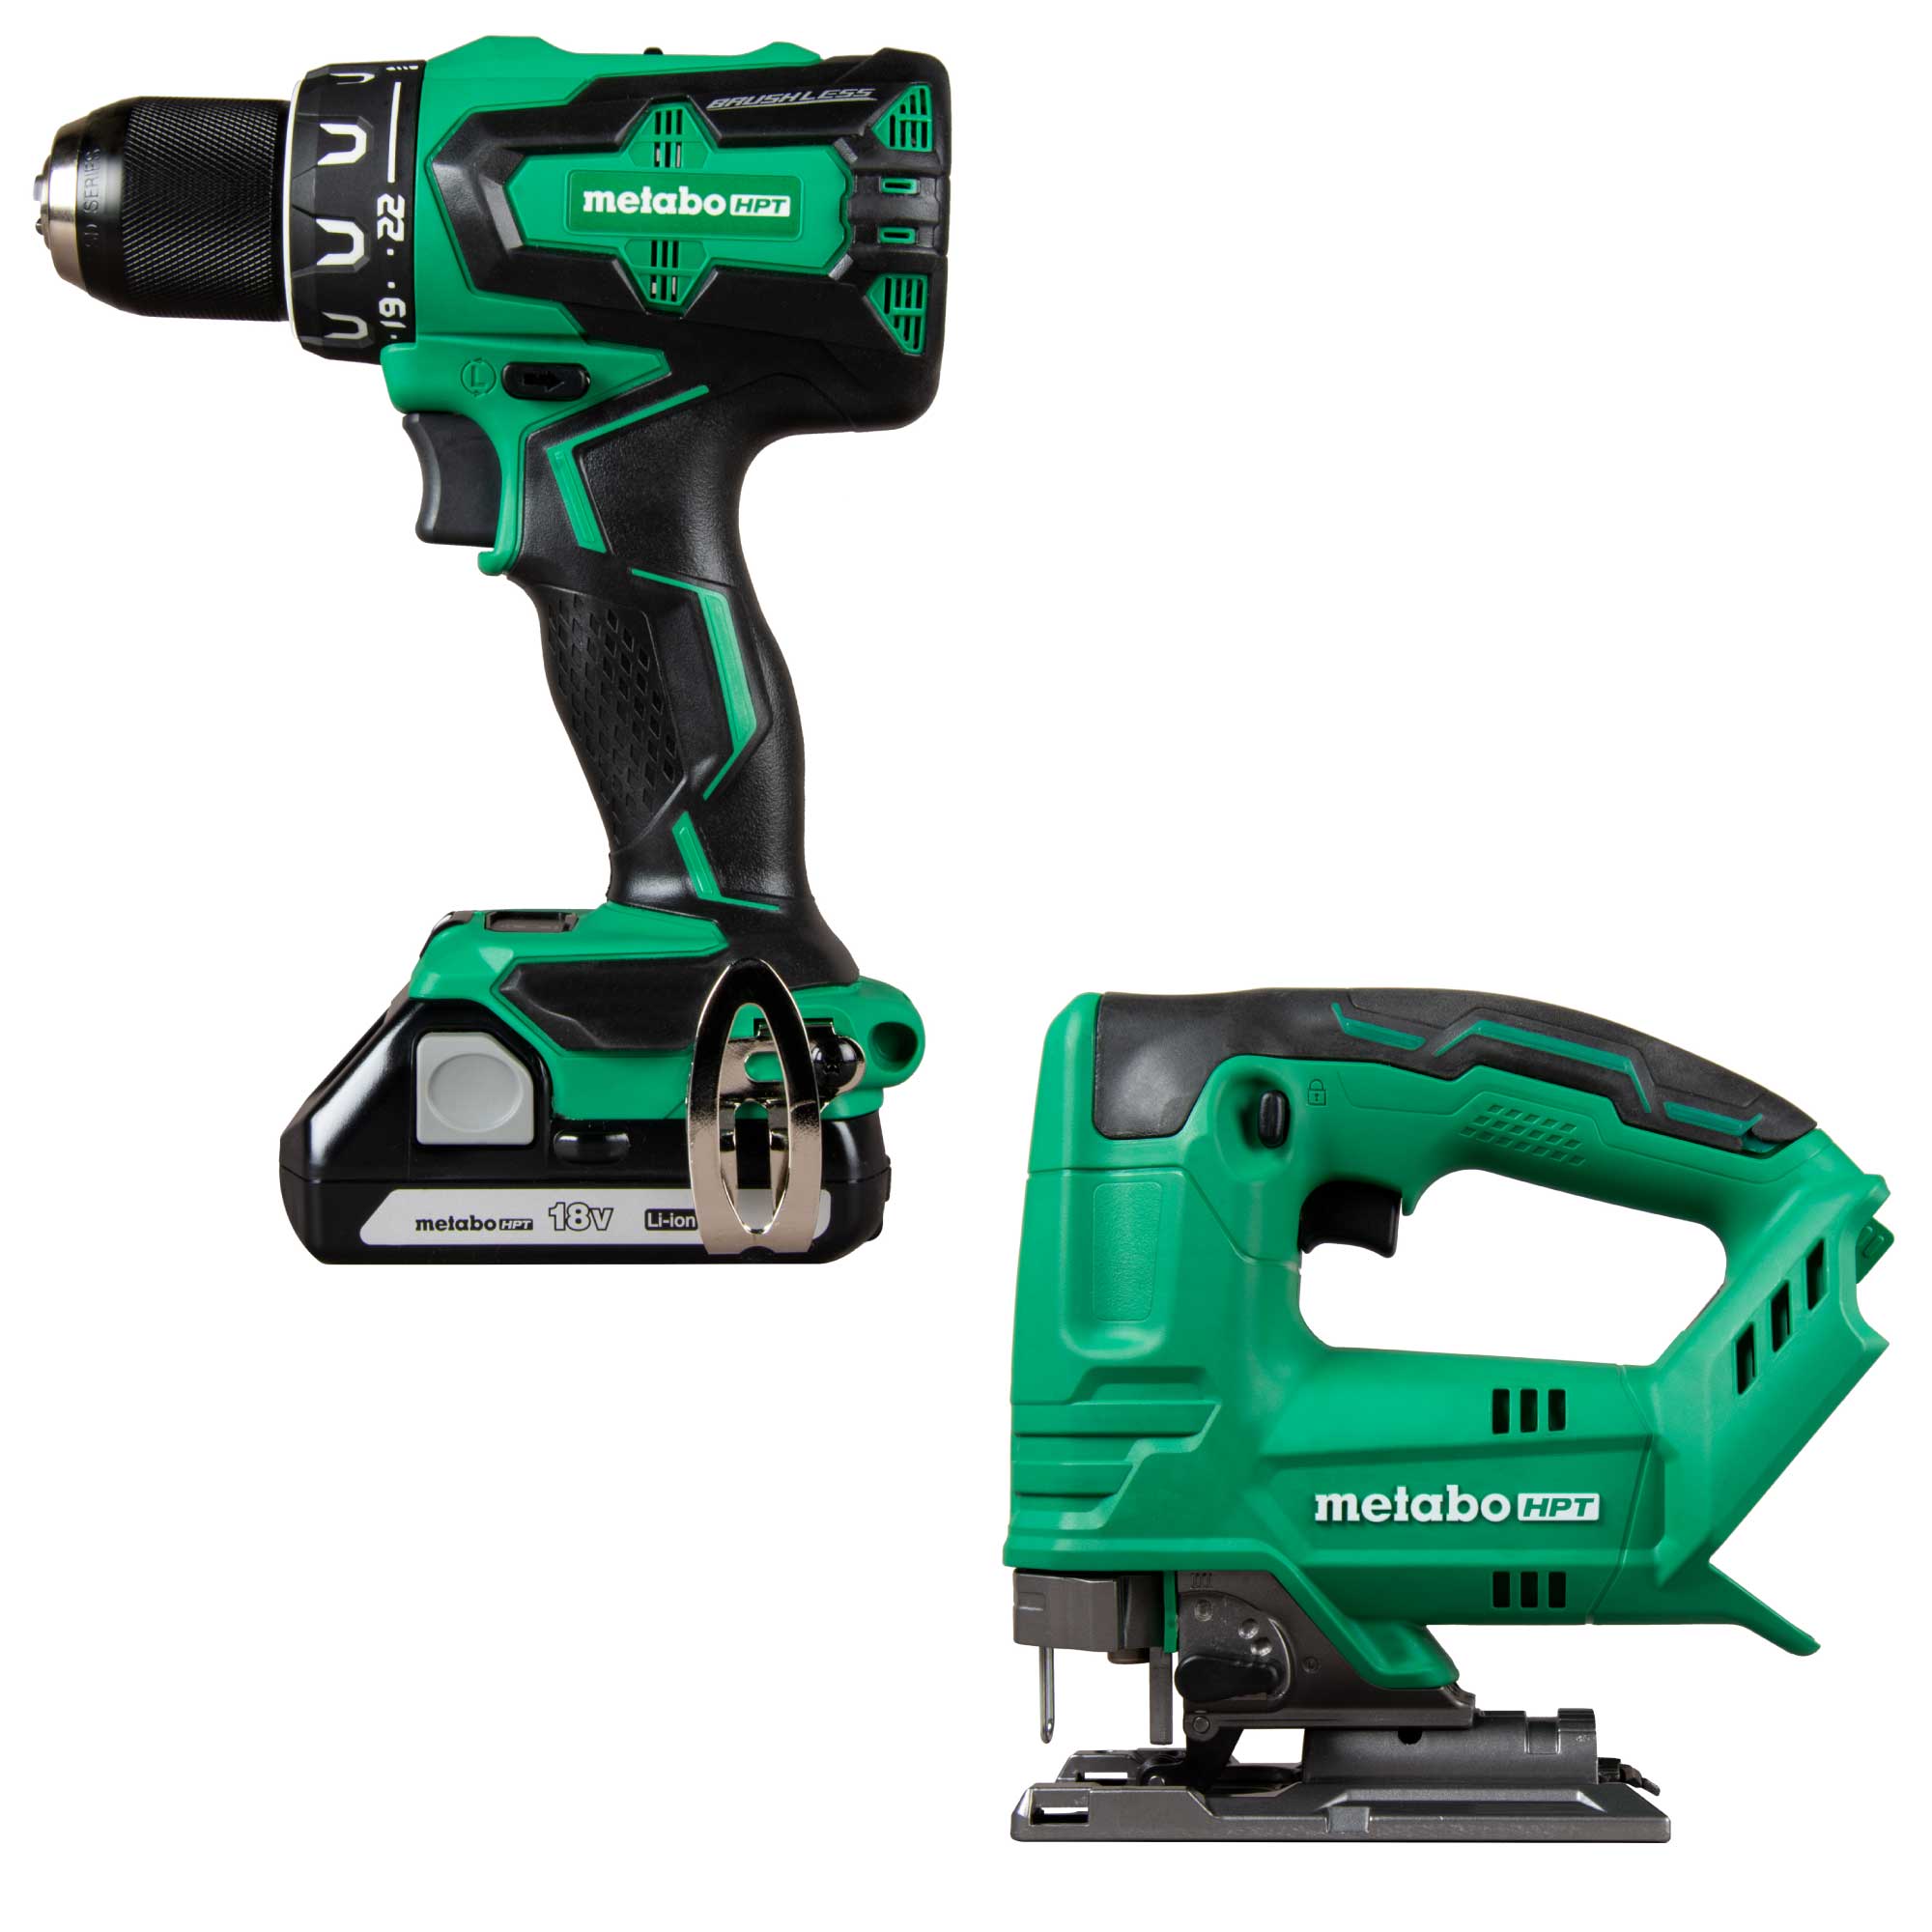 Metabo HPT MultiVolt 18-Volt 1/2-in Brushless Cordless Drill (2-batteries included and charger included) with MultiVolt 18-volt Variable Keyless